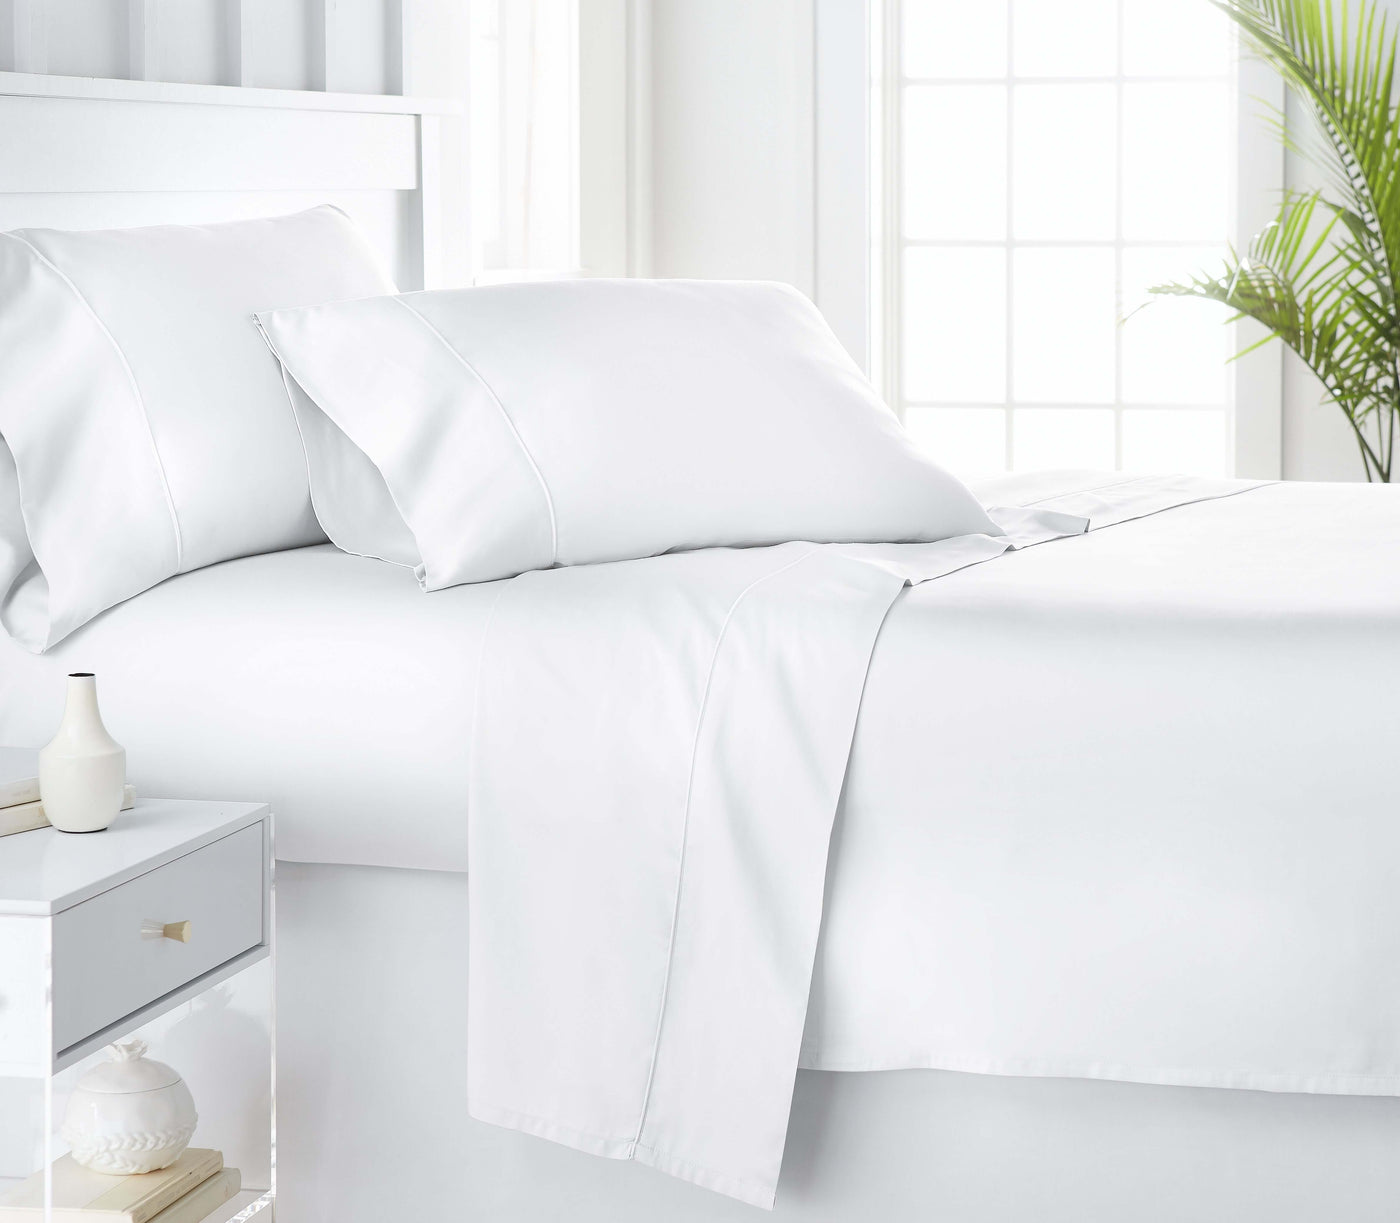 White organic bamboo bed sheets on the bed